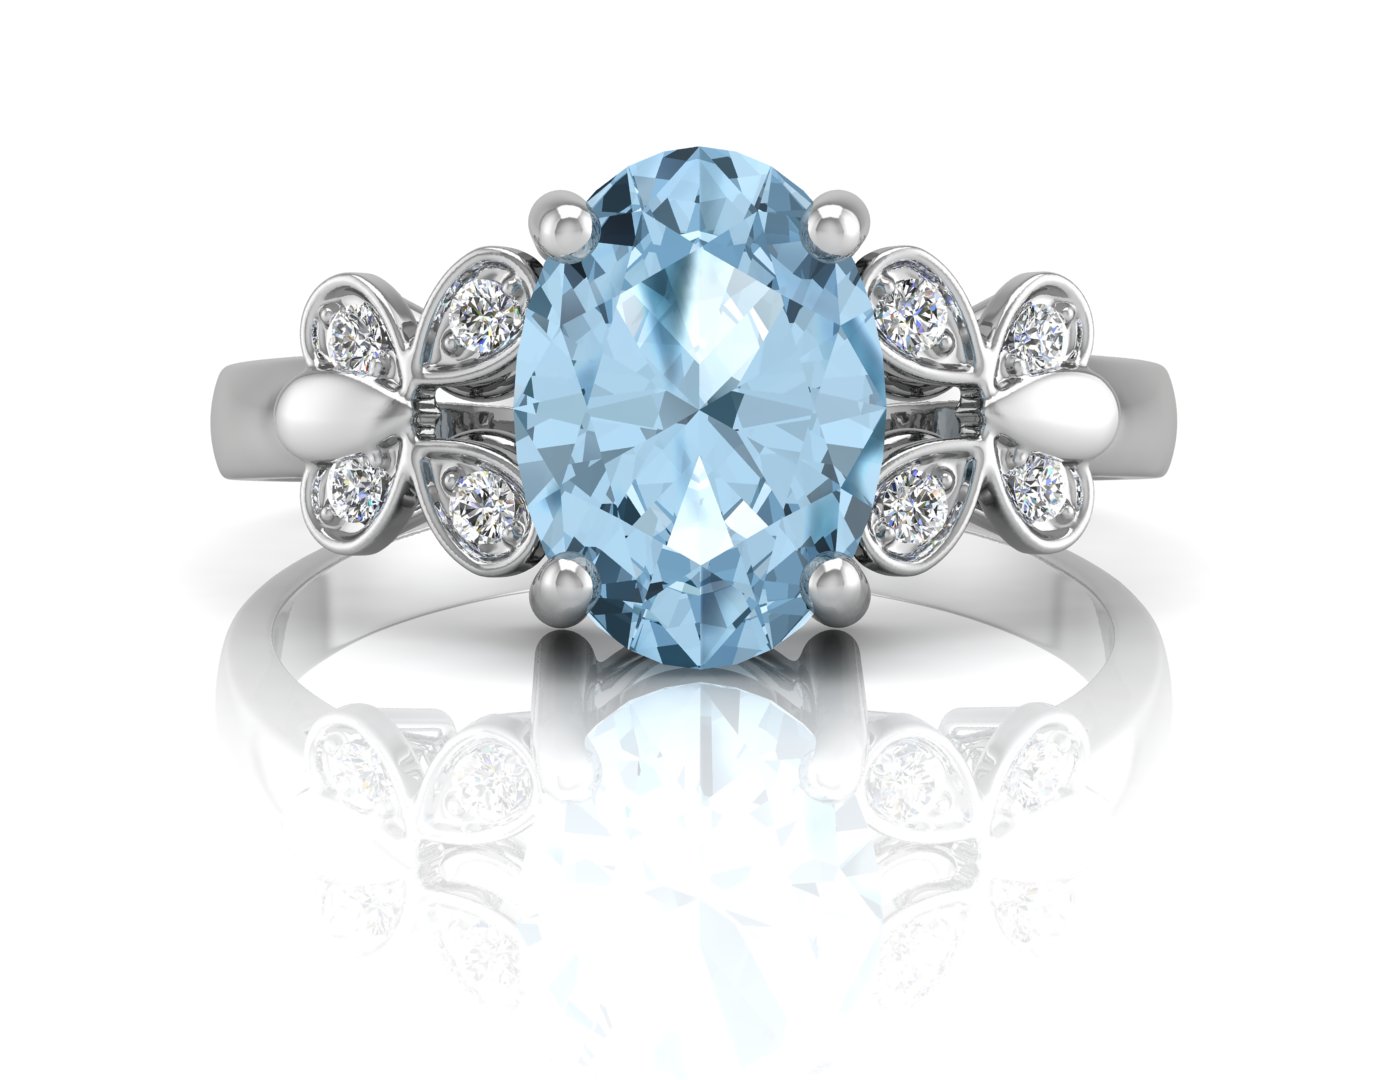 9ct White Gold Diamond And Blue Topaz Ring - Image 4 of 4